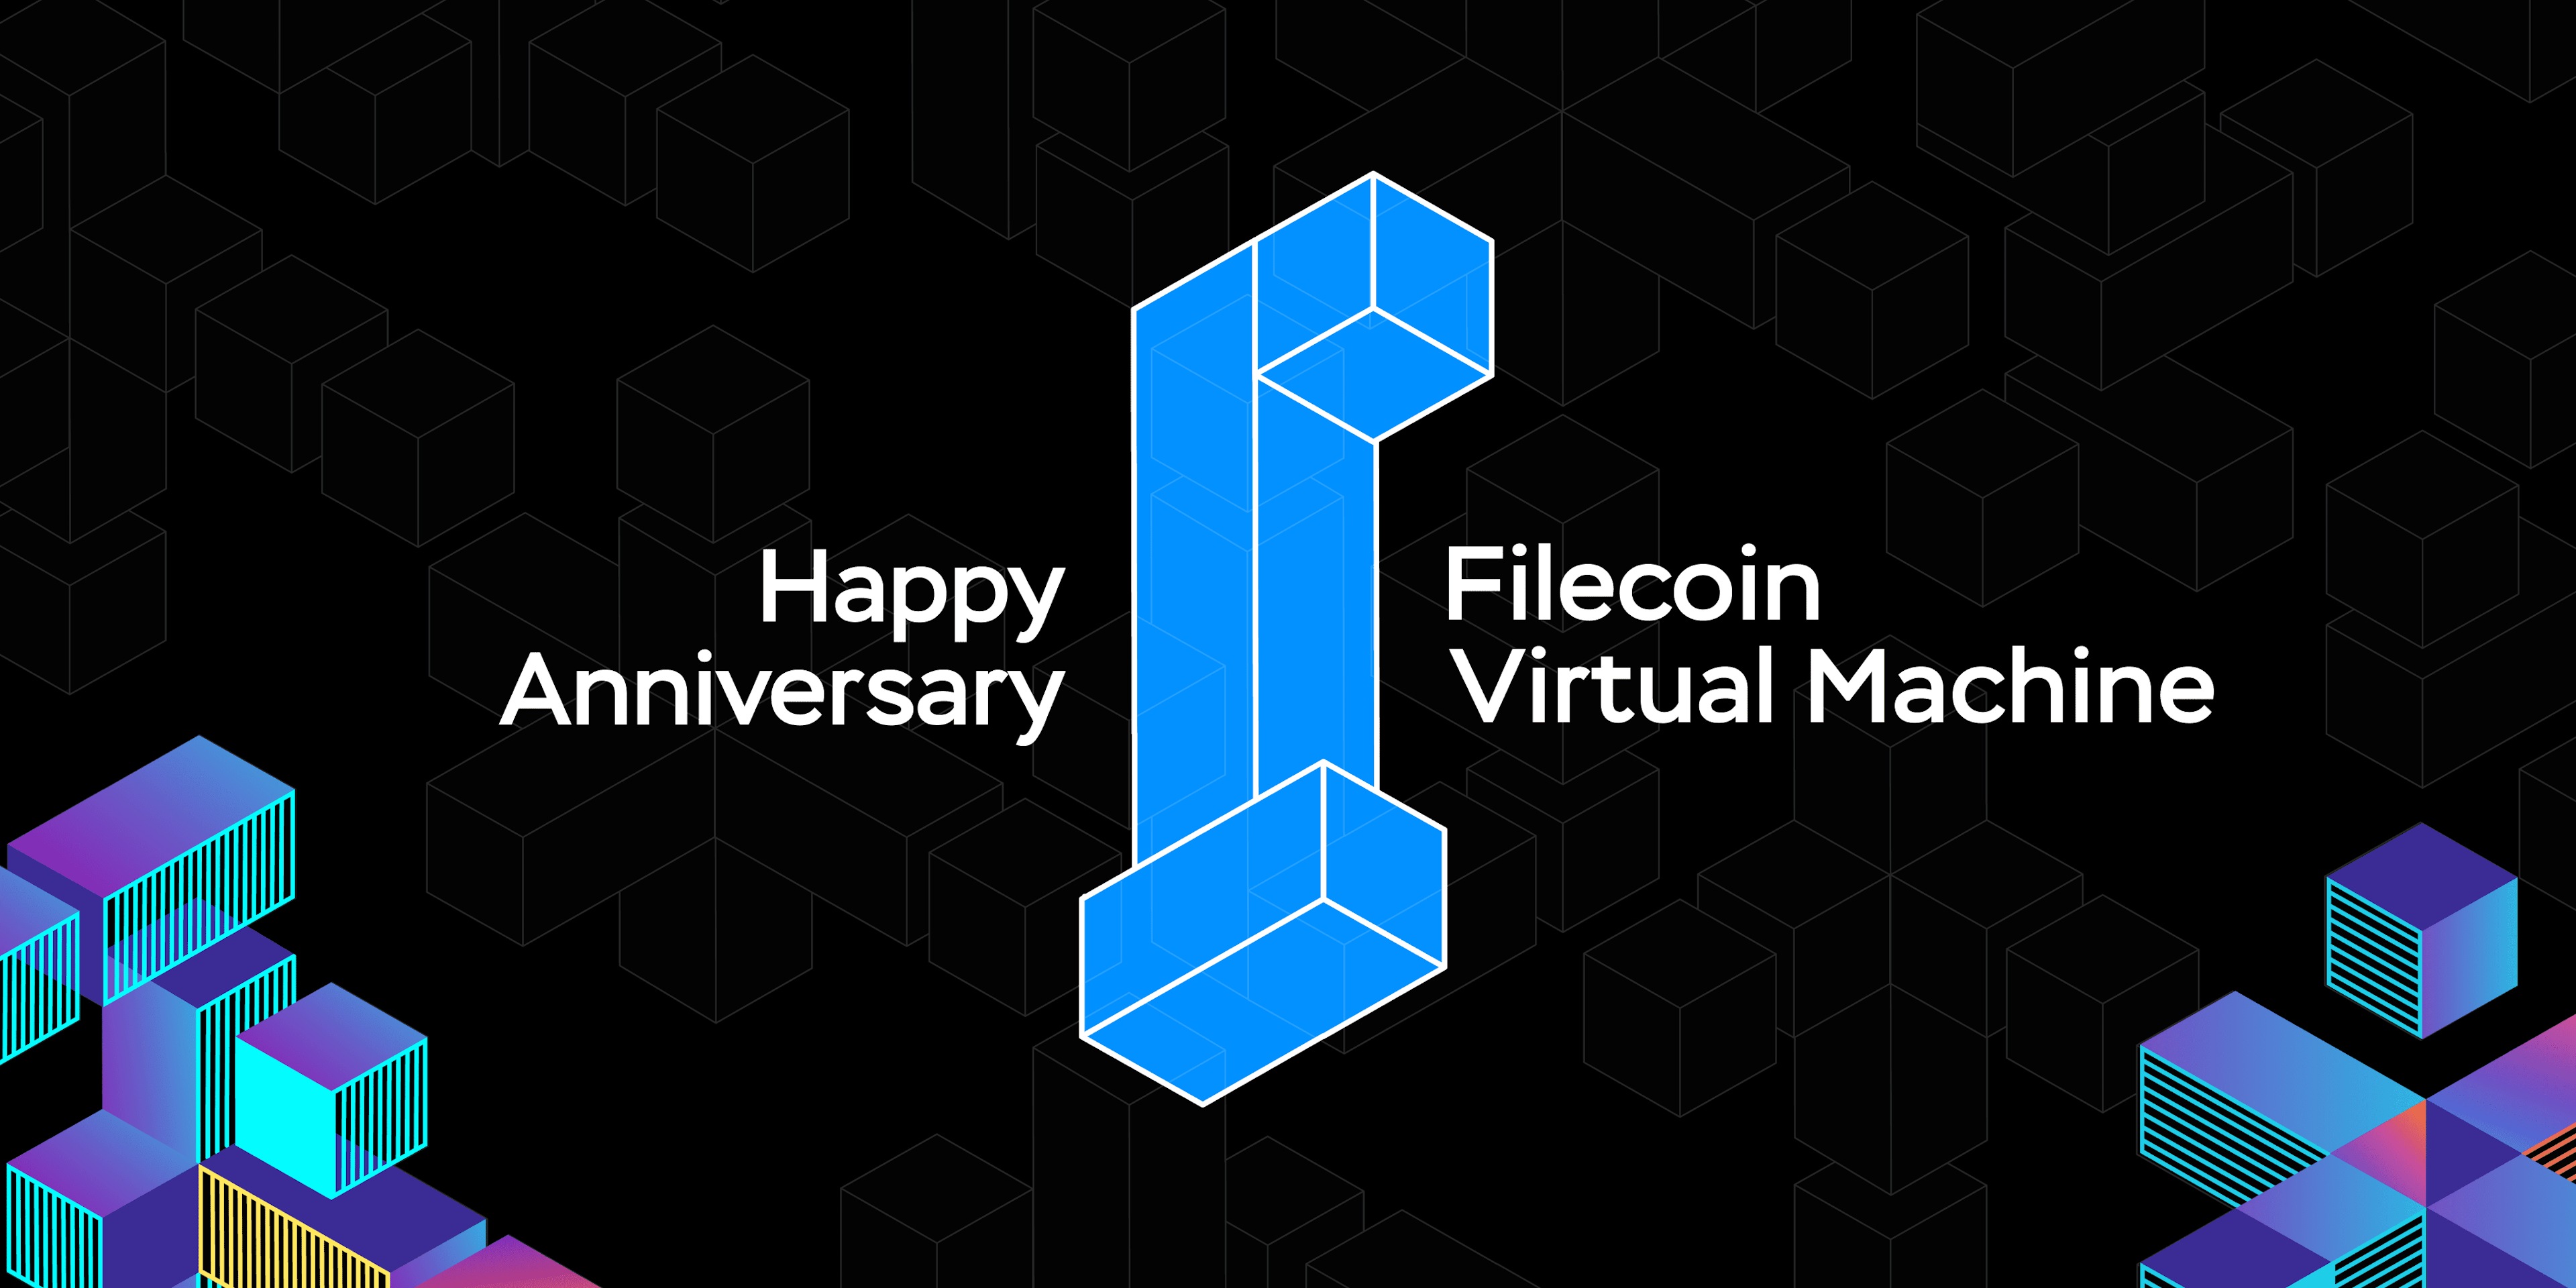 One Year of Programmability, Smart Contracts, and Dapp Growth on Filecoin